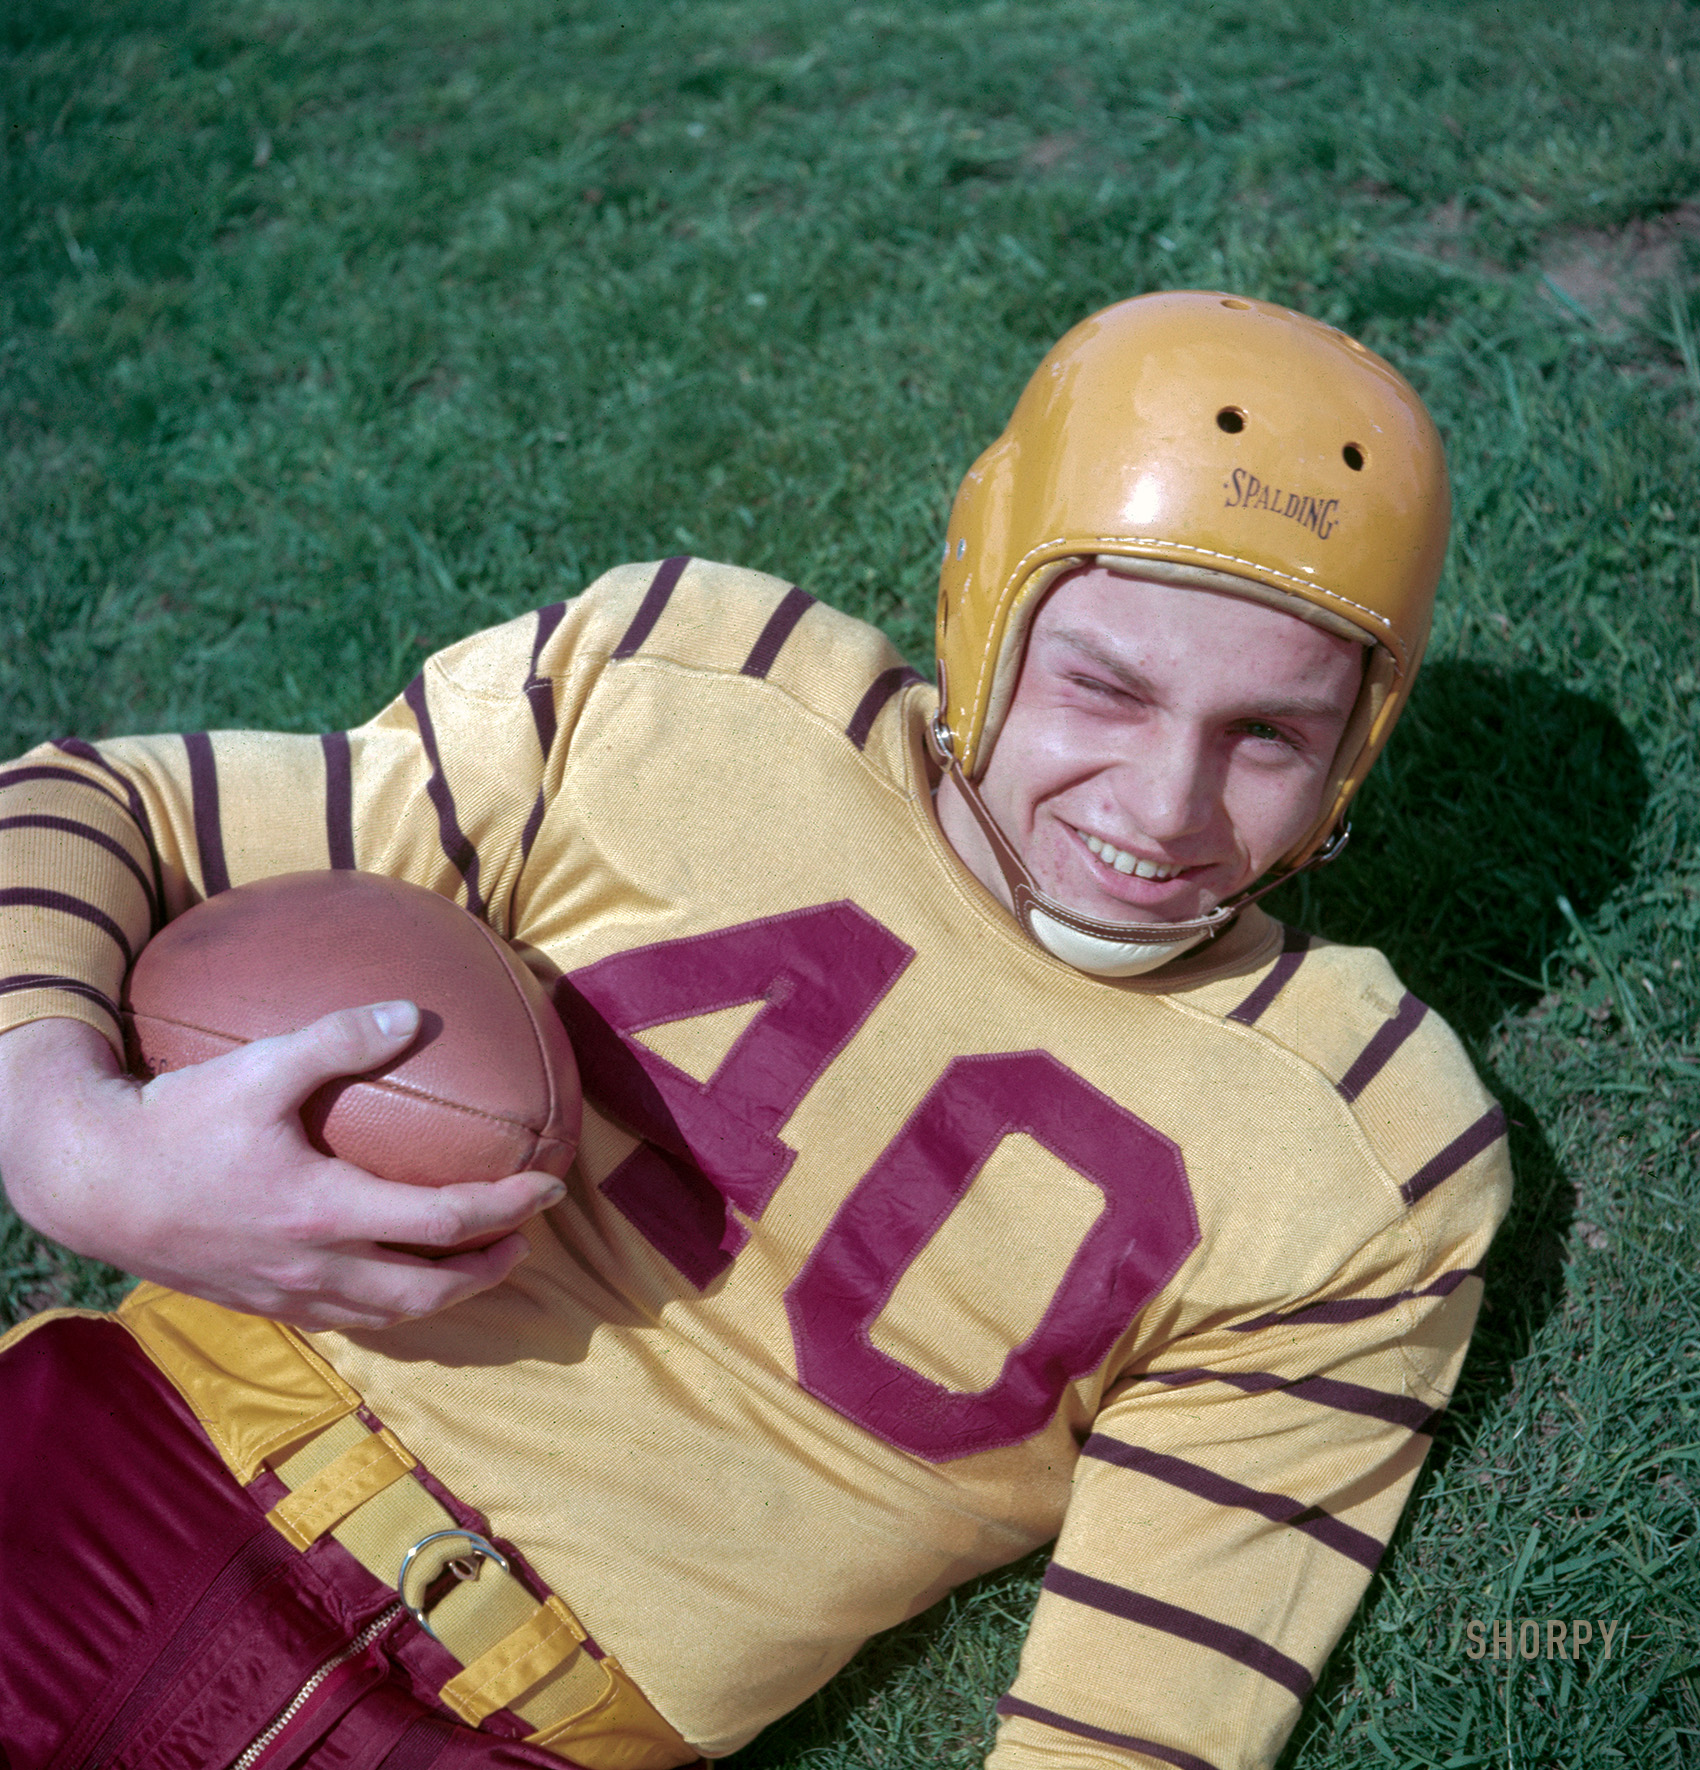 May 1952. "Weymouth (Massachusetts) High School football team. Halfback Glenn Allen of the Weymouth Maroons with football." Color transparency by Jim Hansen for the Look magazine assignment "Championship High-School Football." View full size.